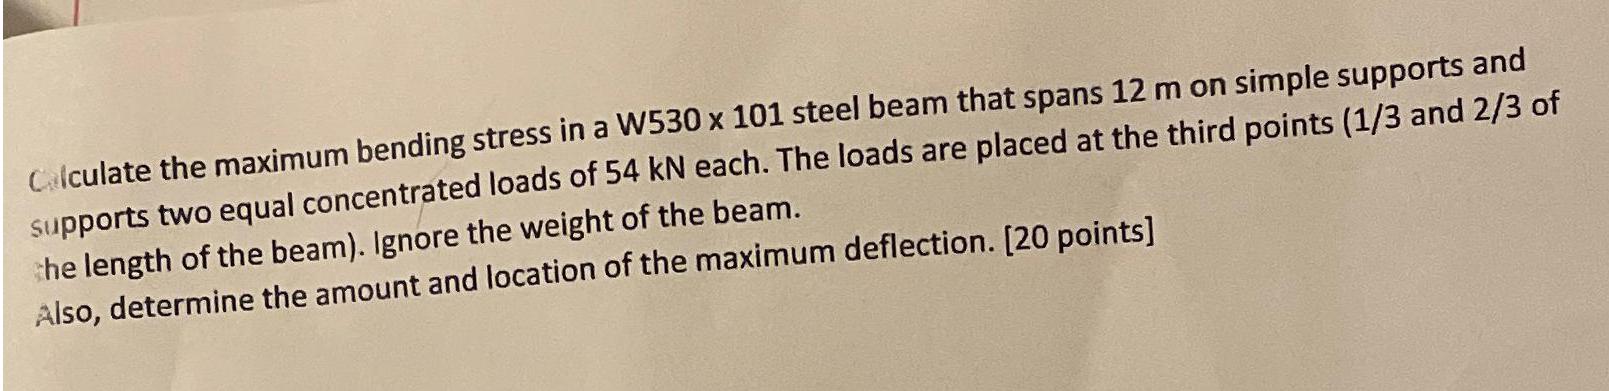 Calculate the maximum bending stress in a W530 x 101 steel beam that spans 12 m on simple supports and